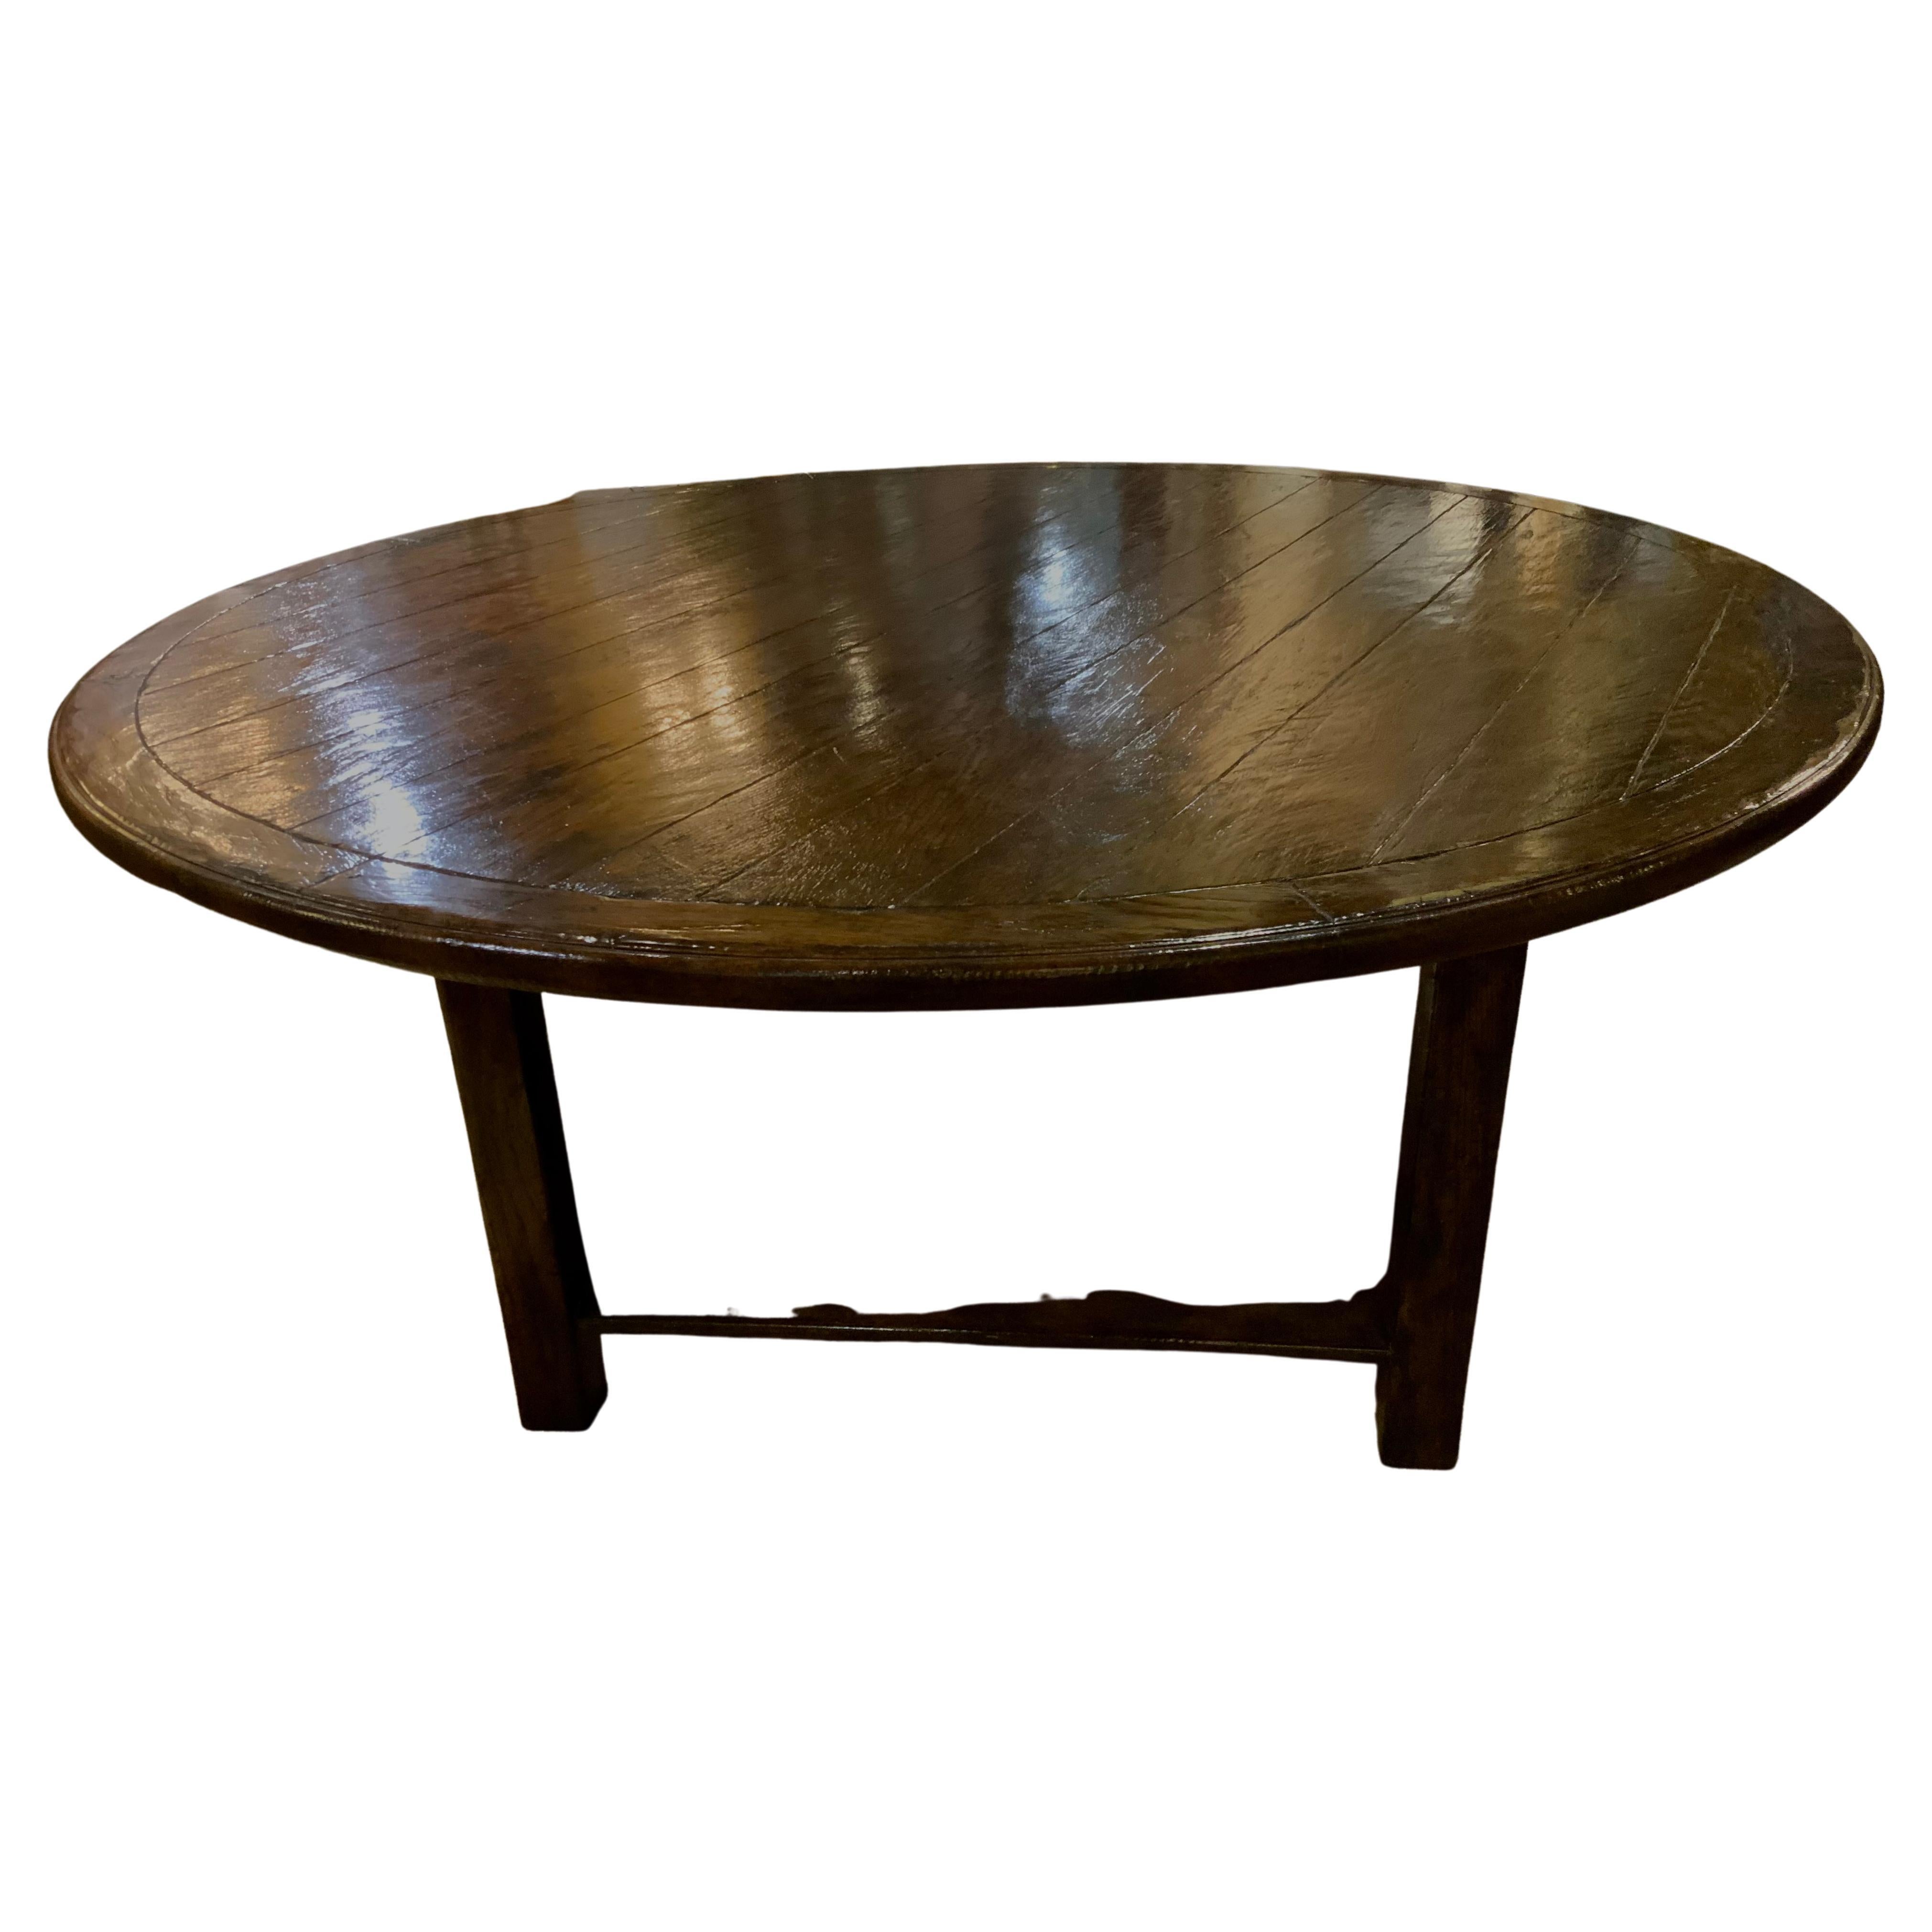 Large, Rustic Oak Round Dining Table For Sale